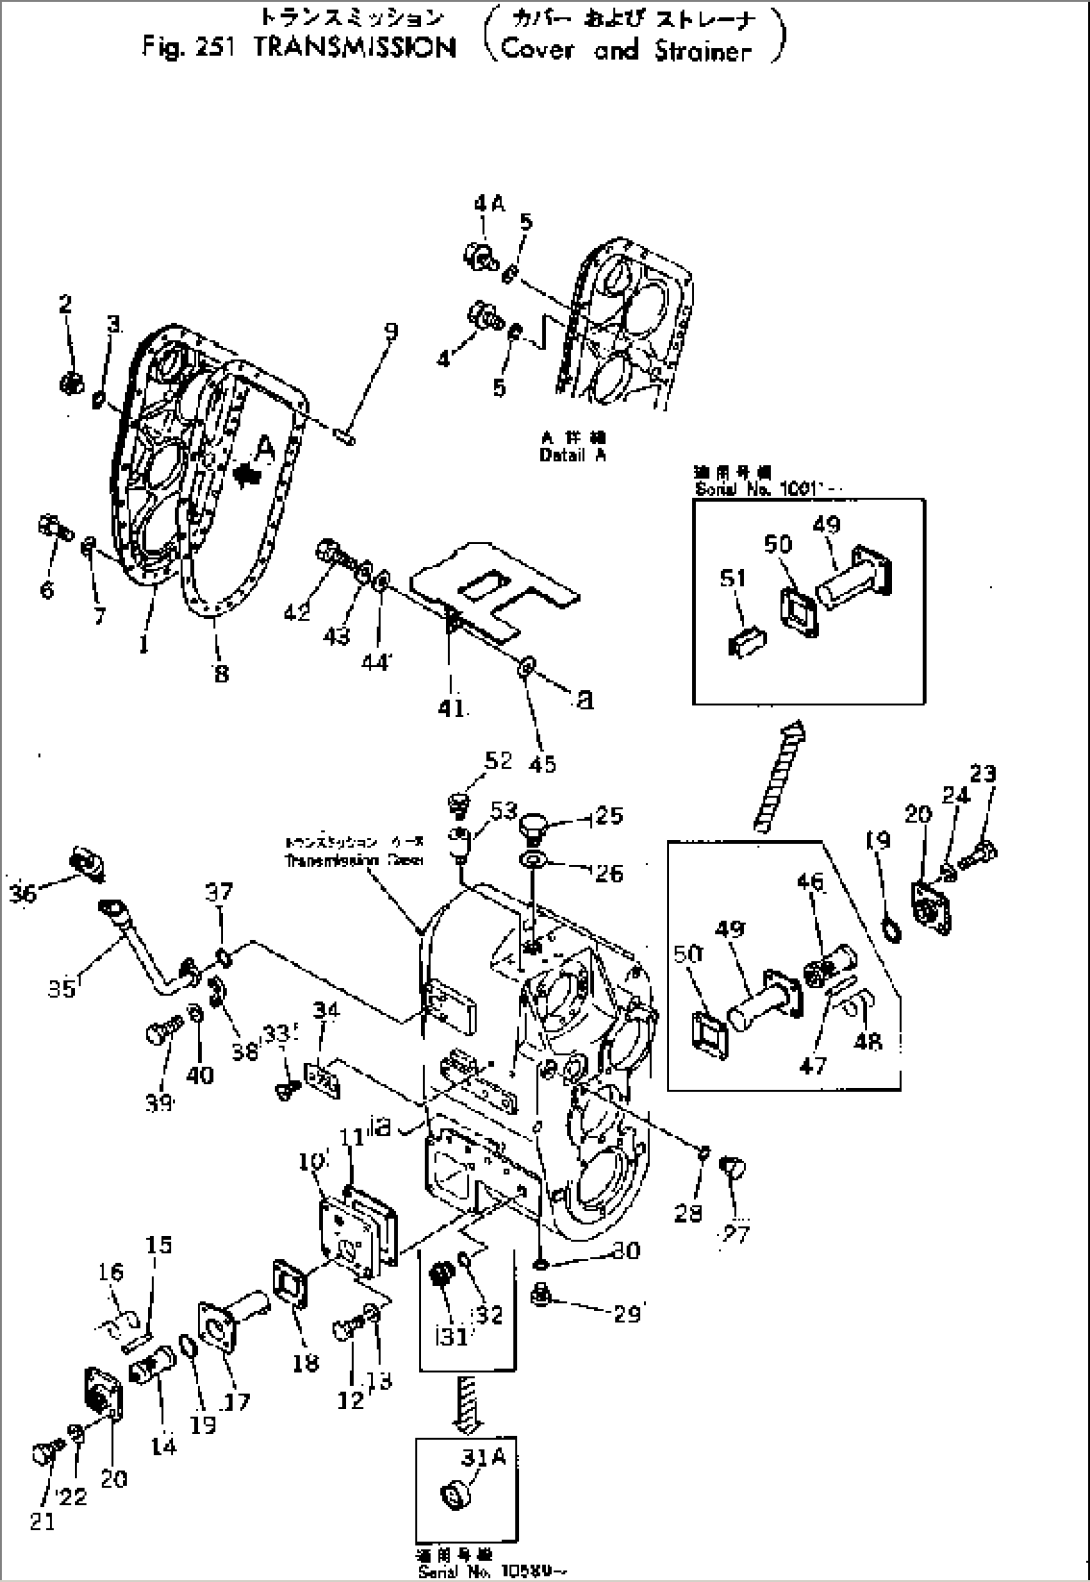 TRANSMISSION (COVER AND STRAINER)(#10001-)